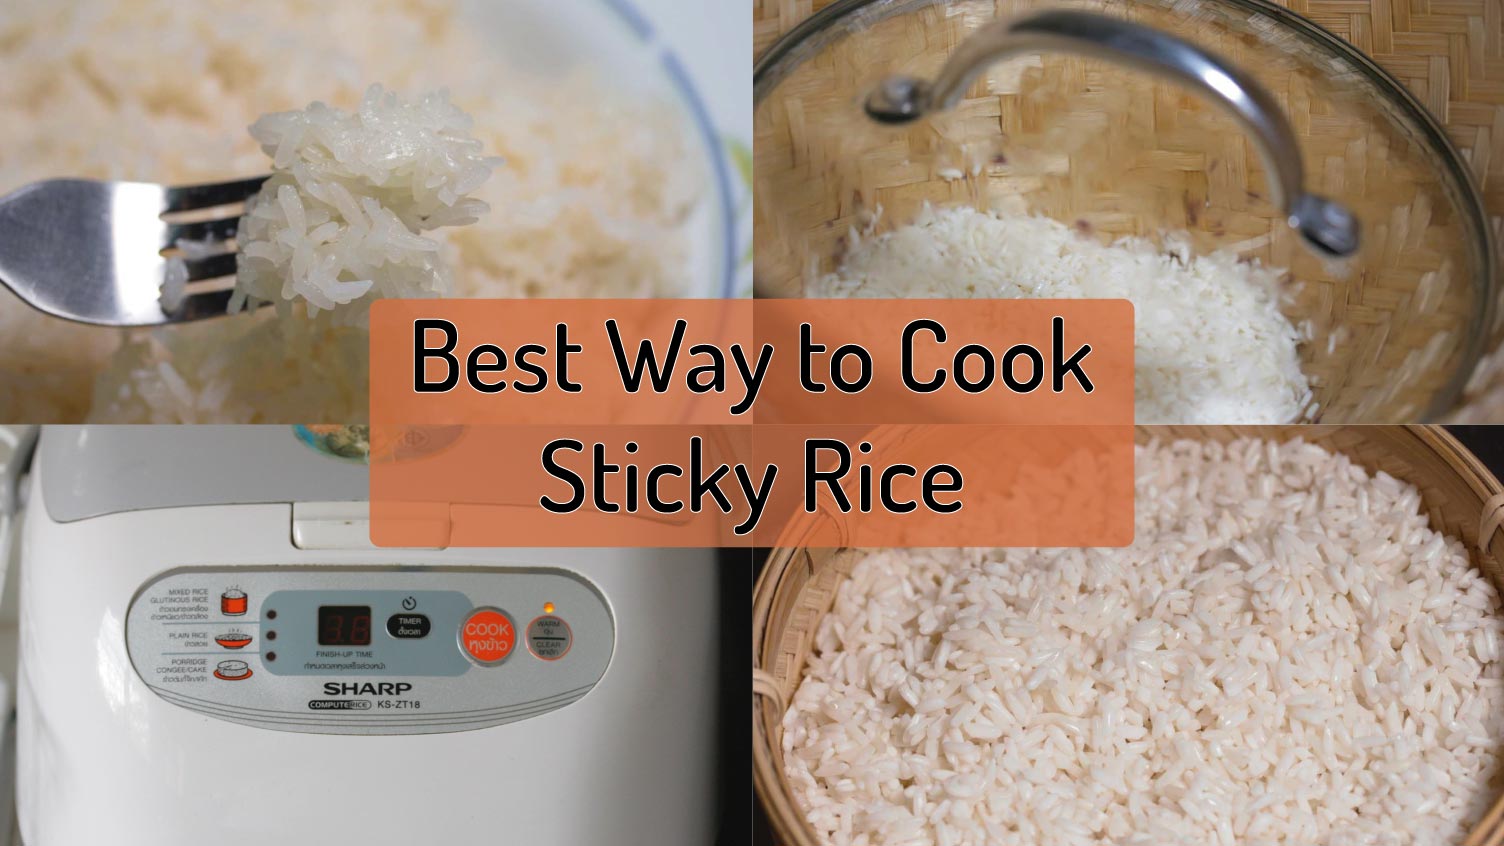 Steam rice cooking time фото 59